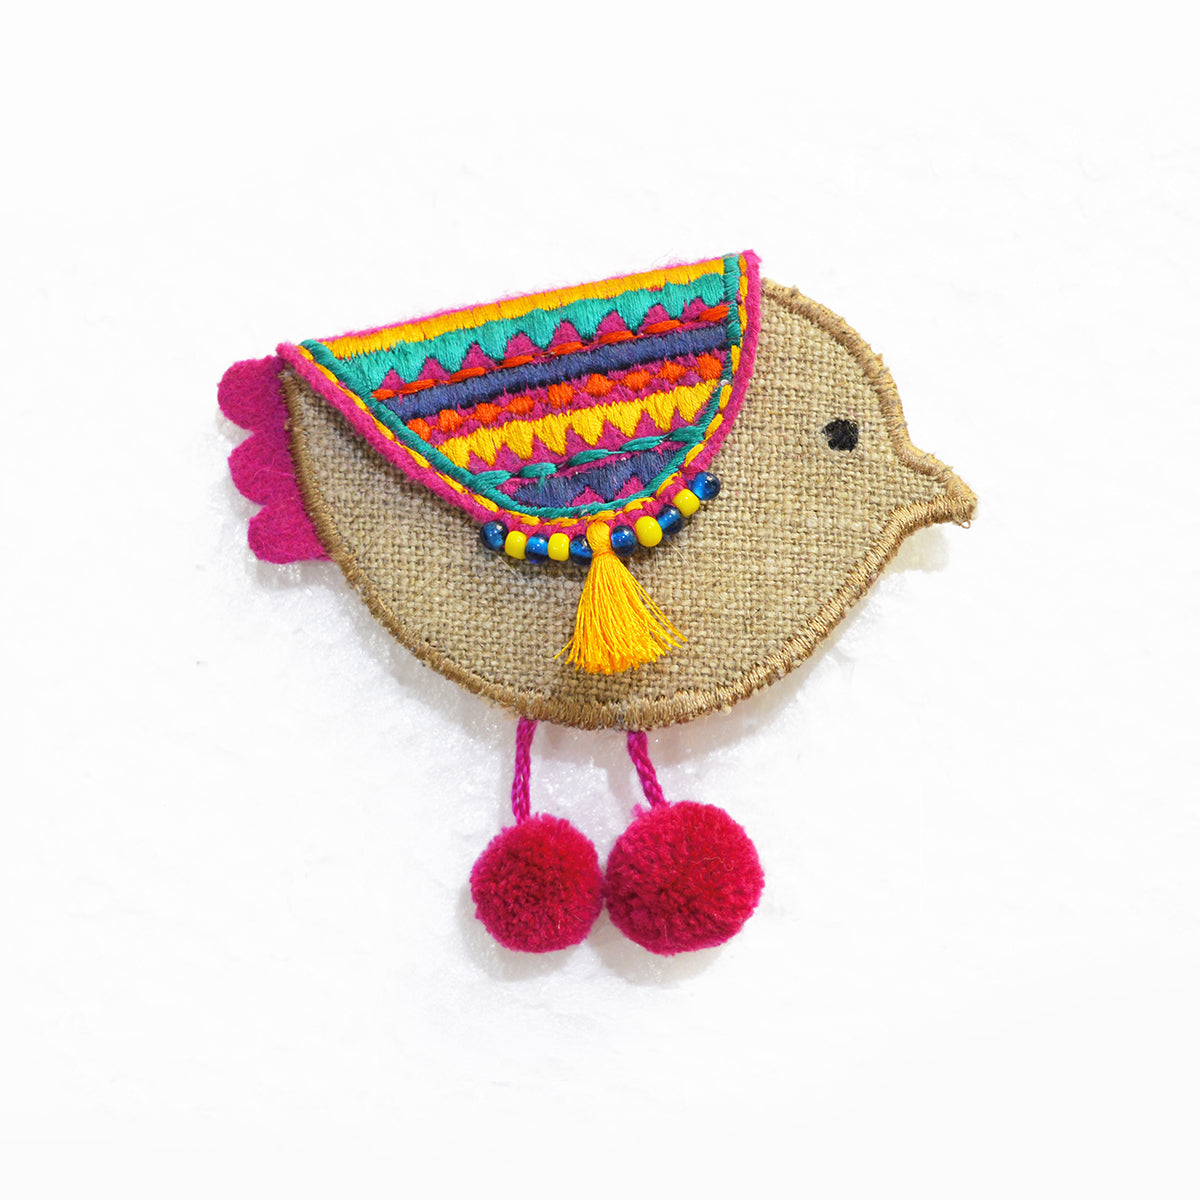 Bird coin bag, wire holder, handmade, gift, bohemian, moroccan size 4X3 inches